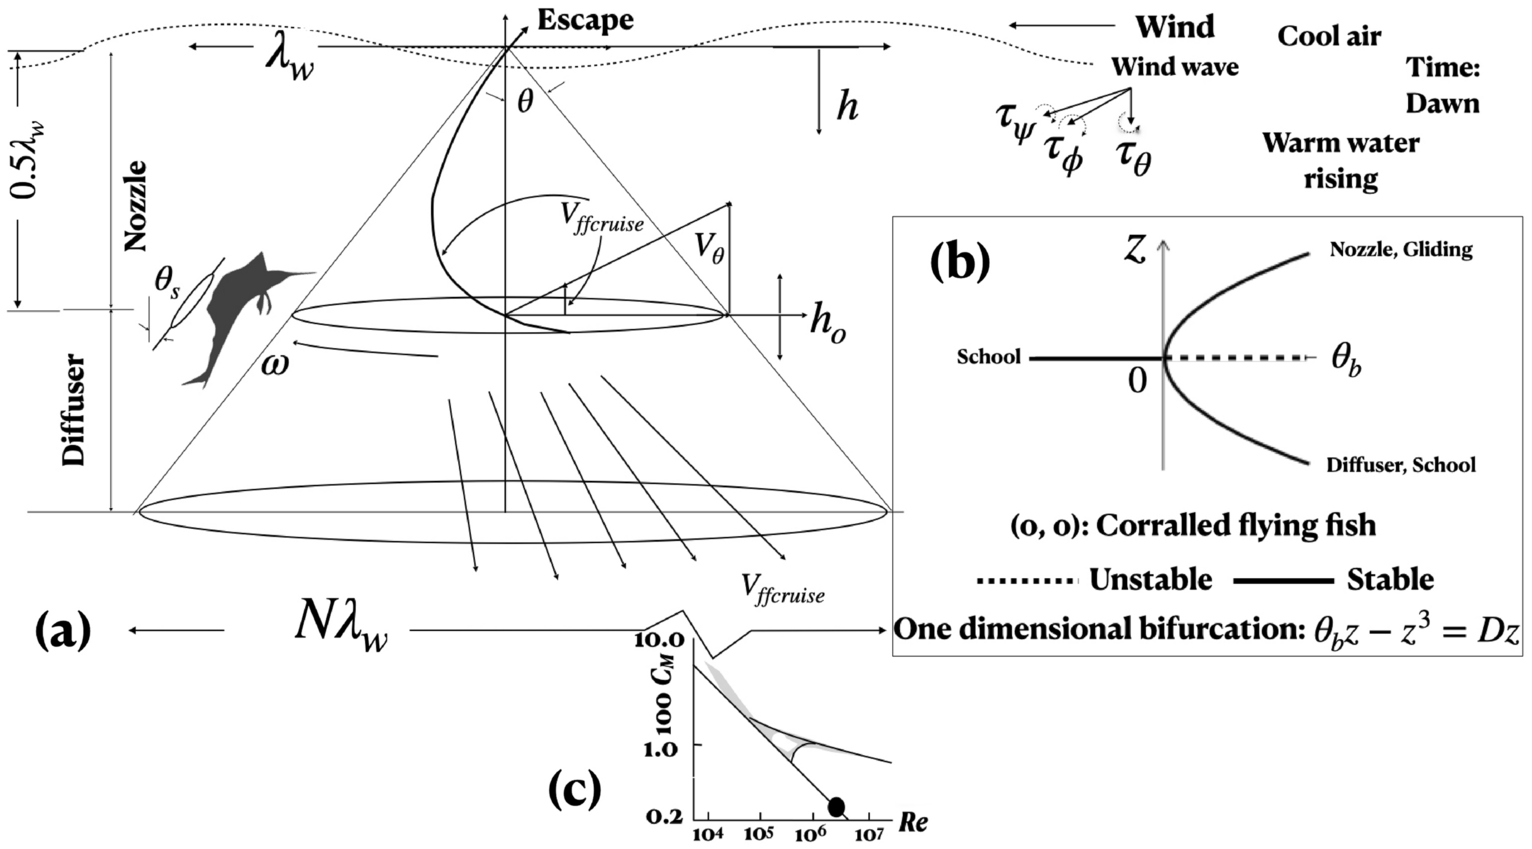 Modes of vibration. (a) Bounce, (b) roll, (c) pitch, and (d) wrap.